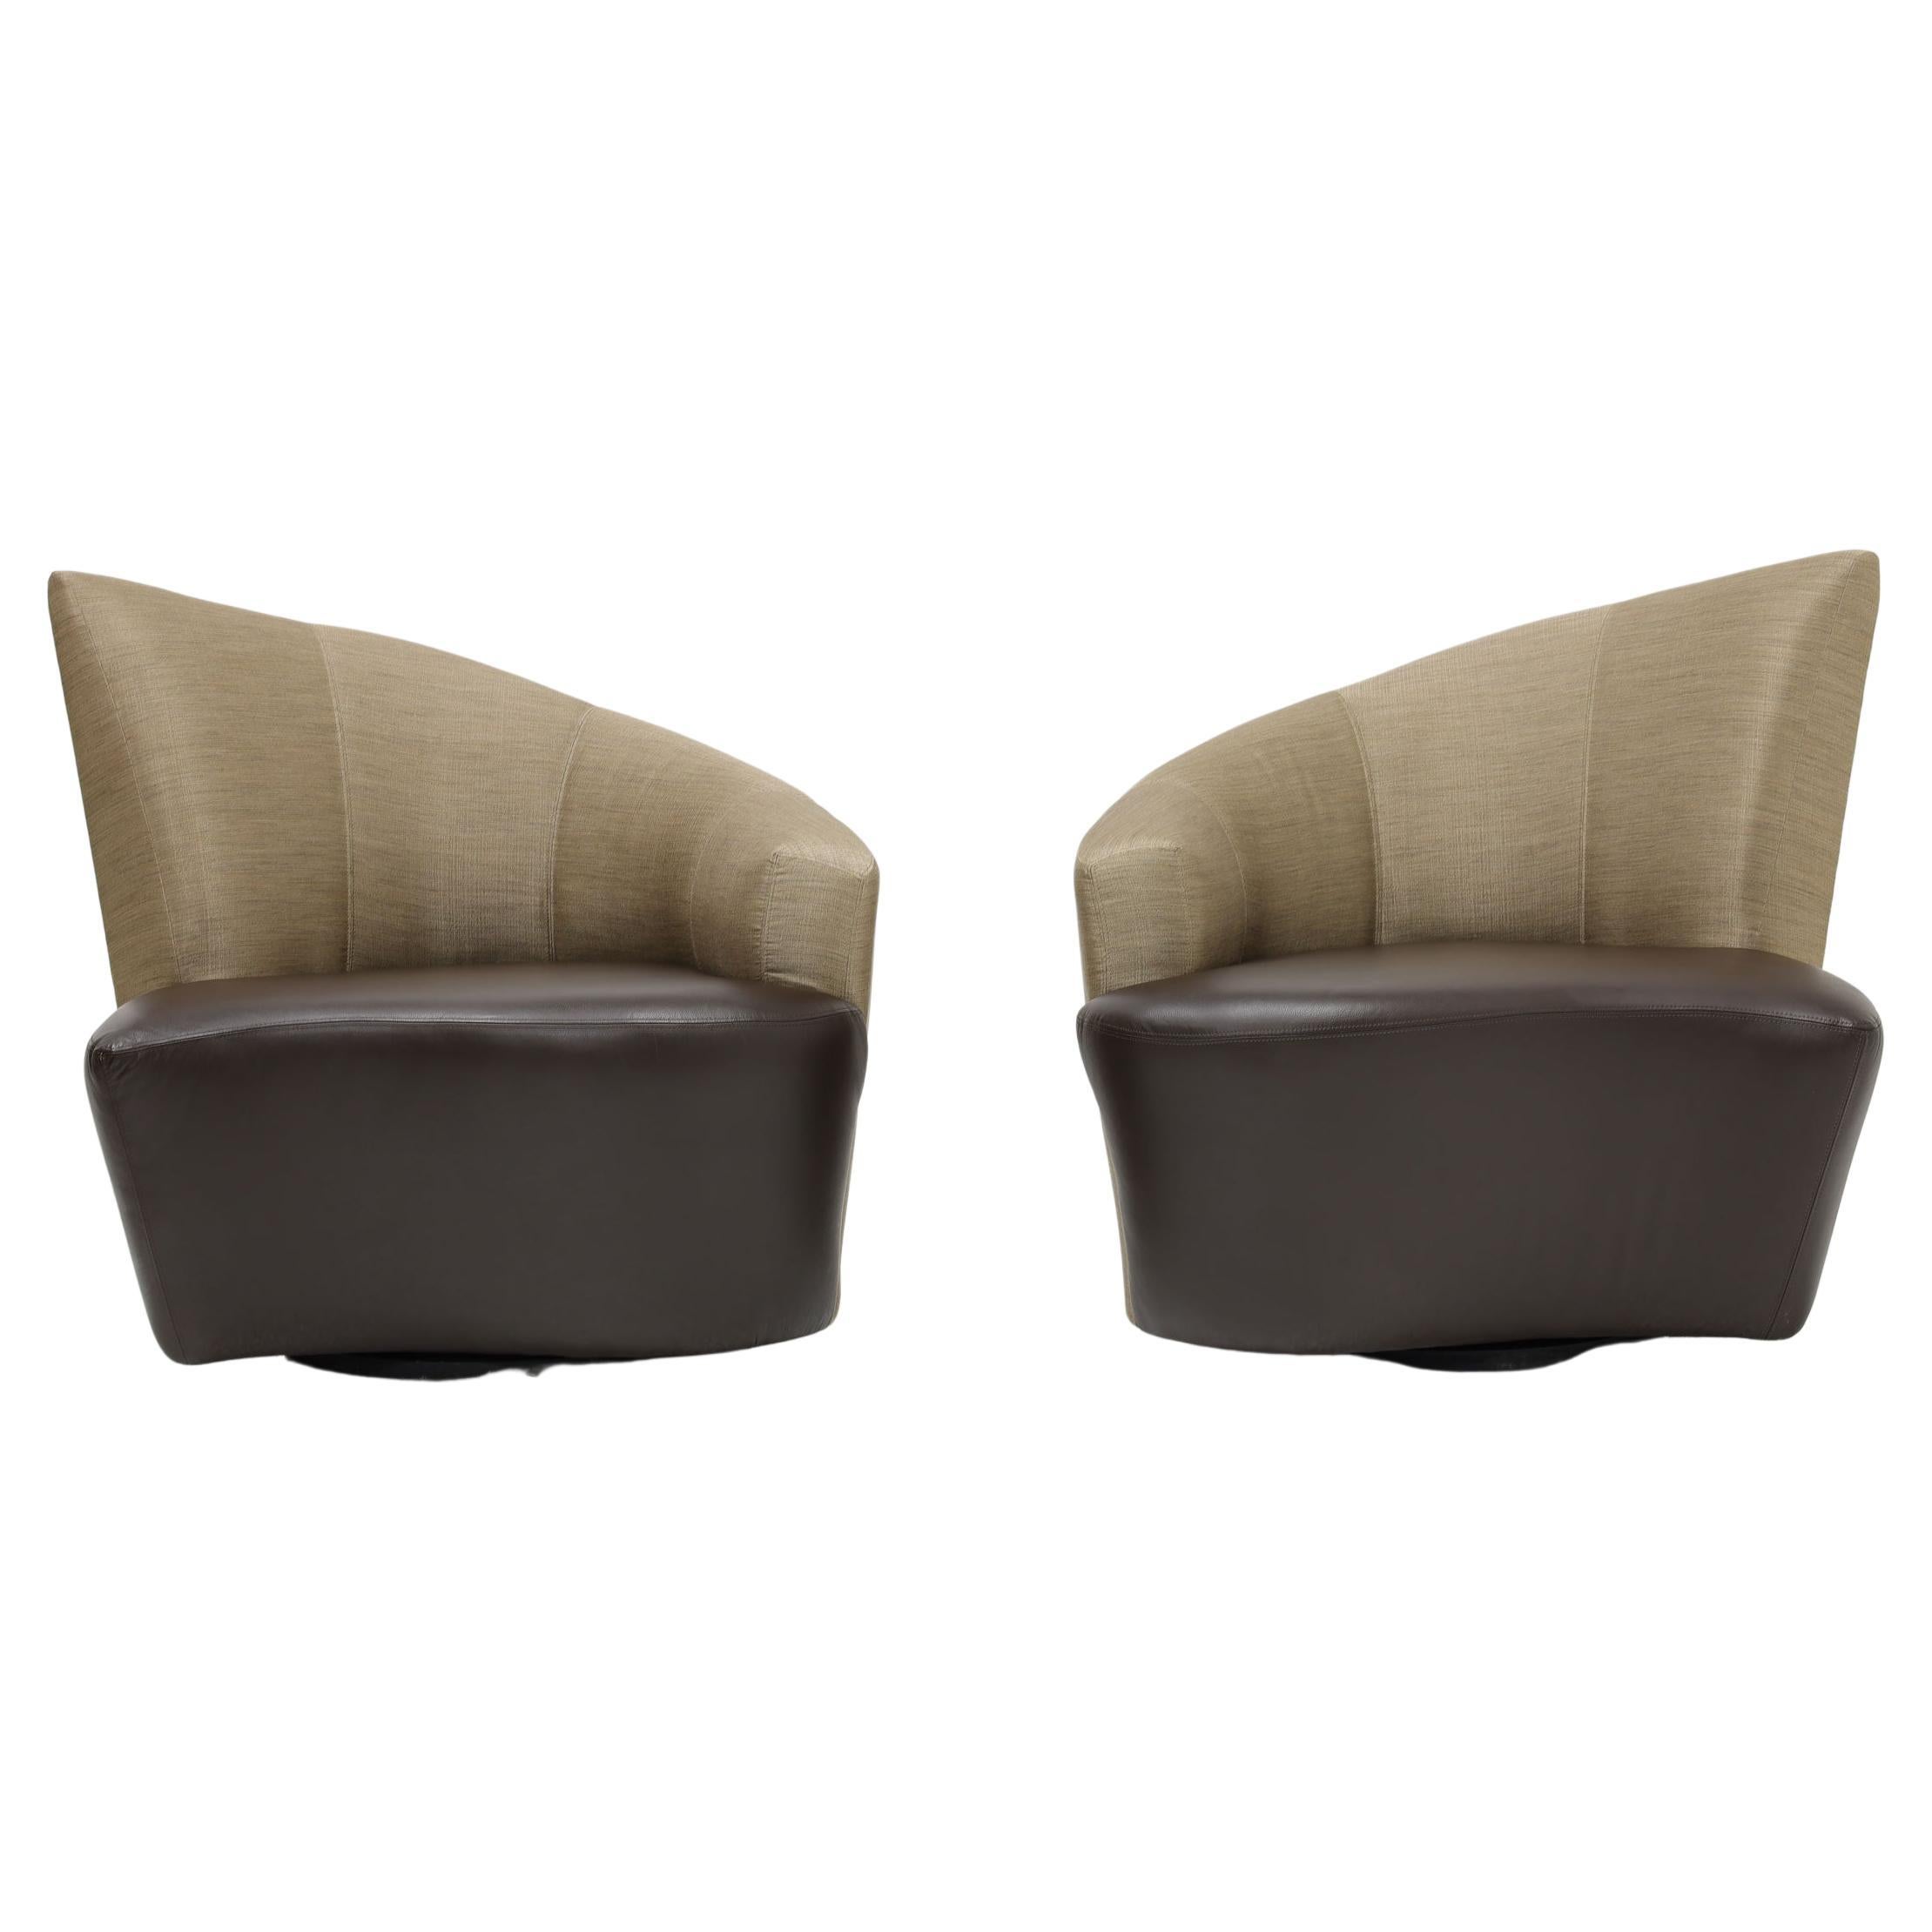 Vladimir Kagan Swivel Bilboa Chairs in Silk and Leather For Sale